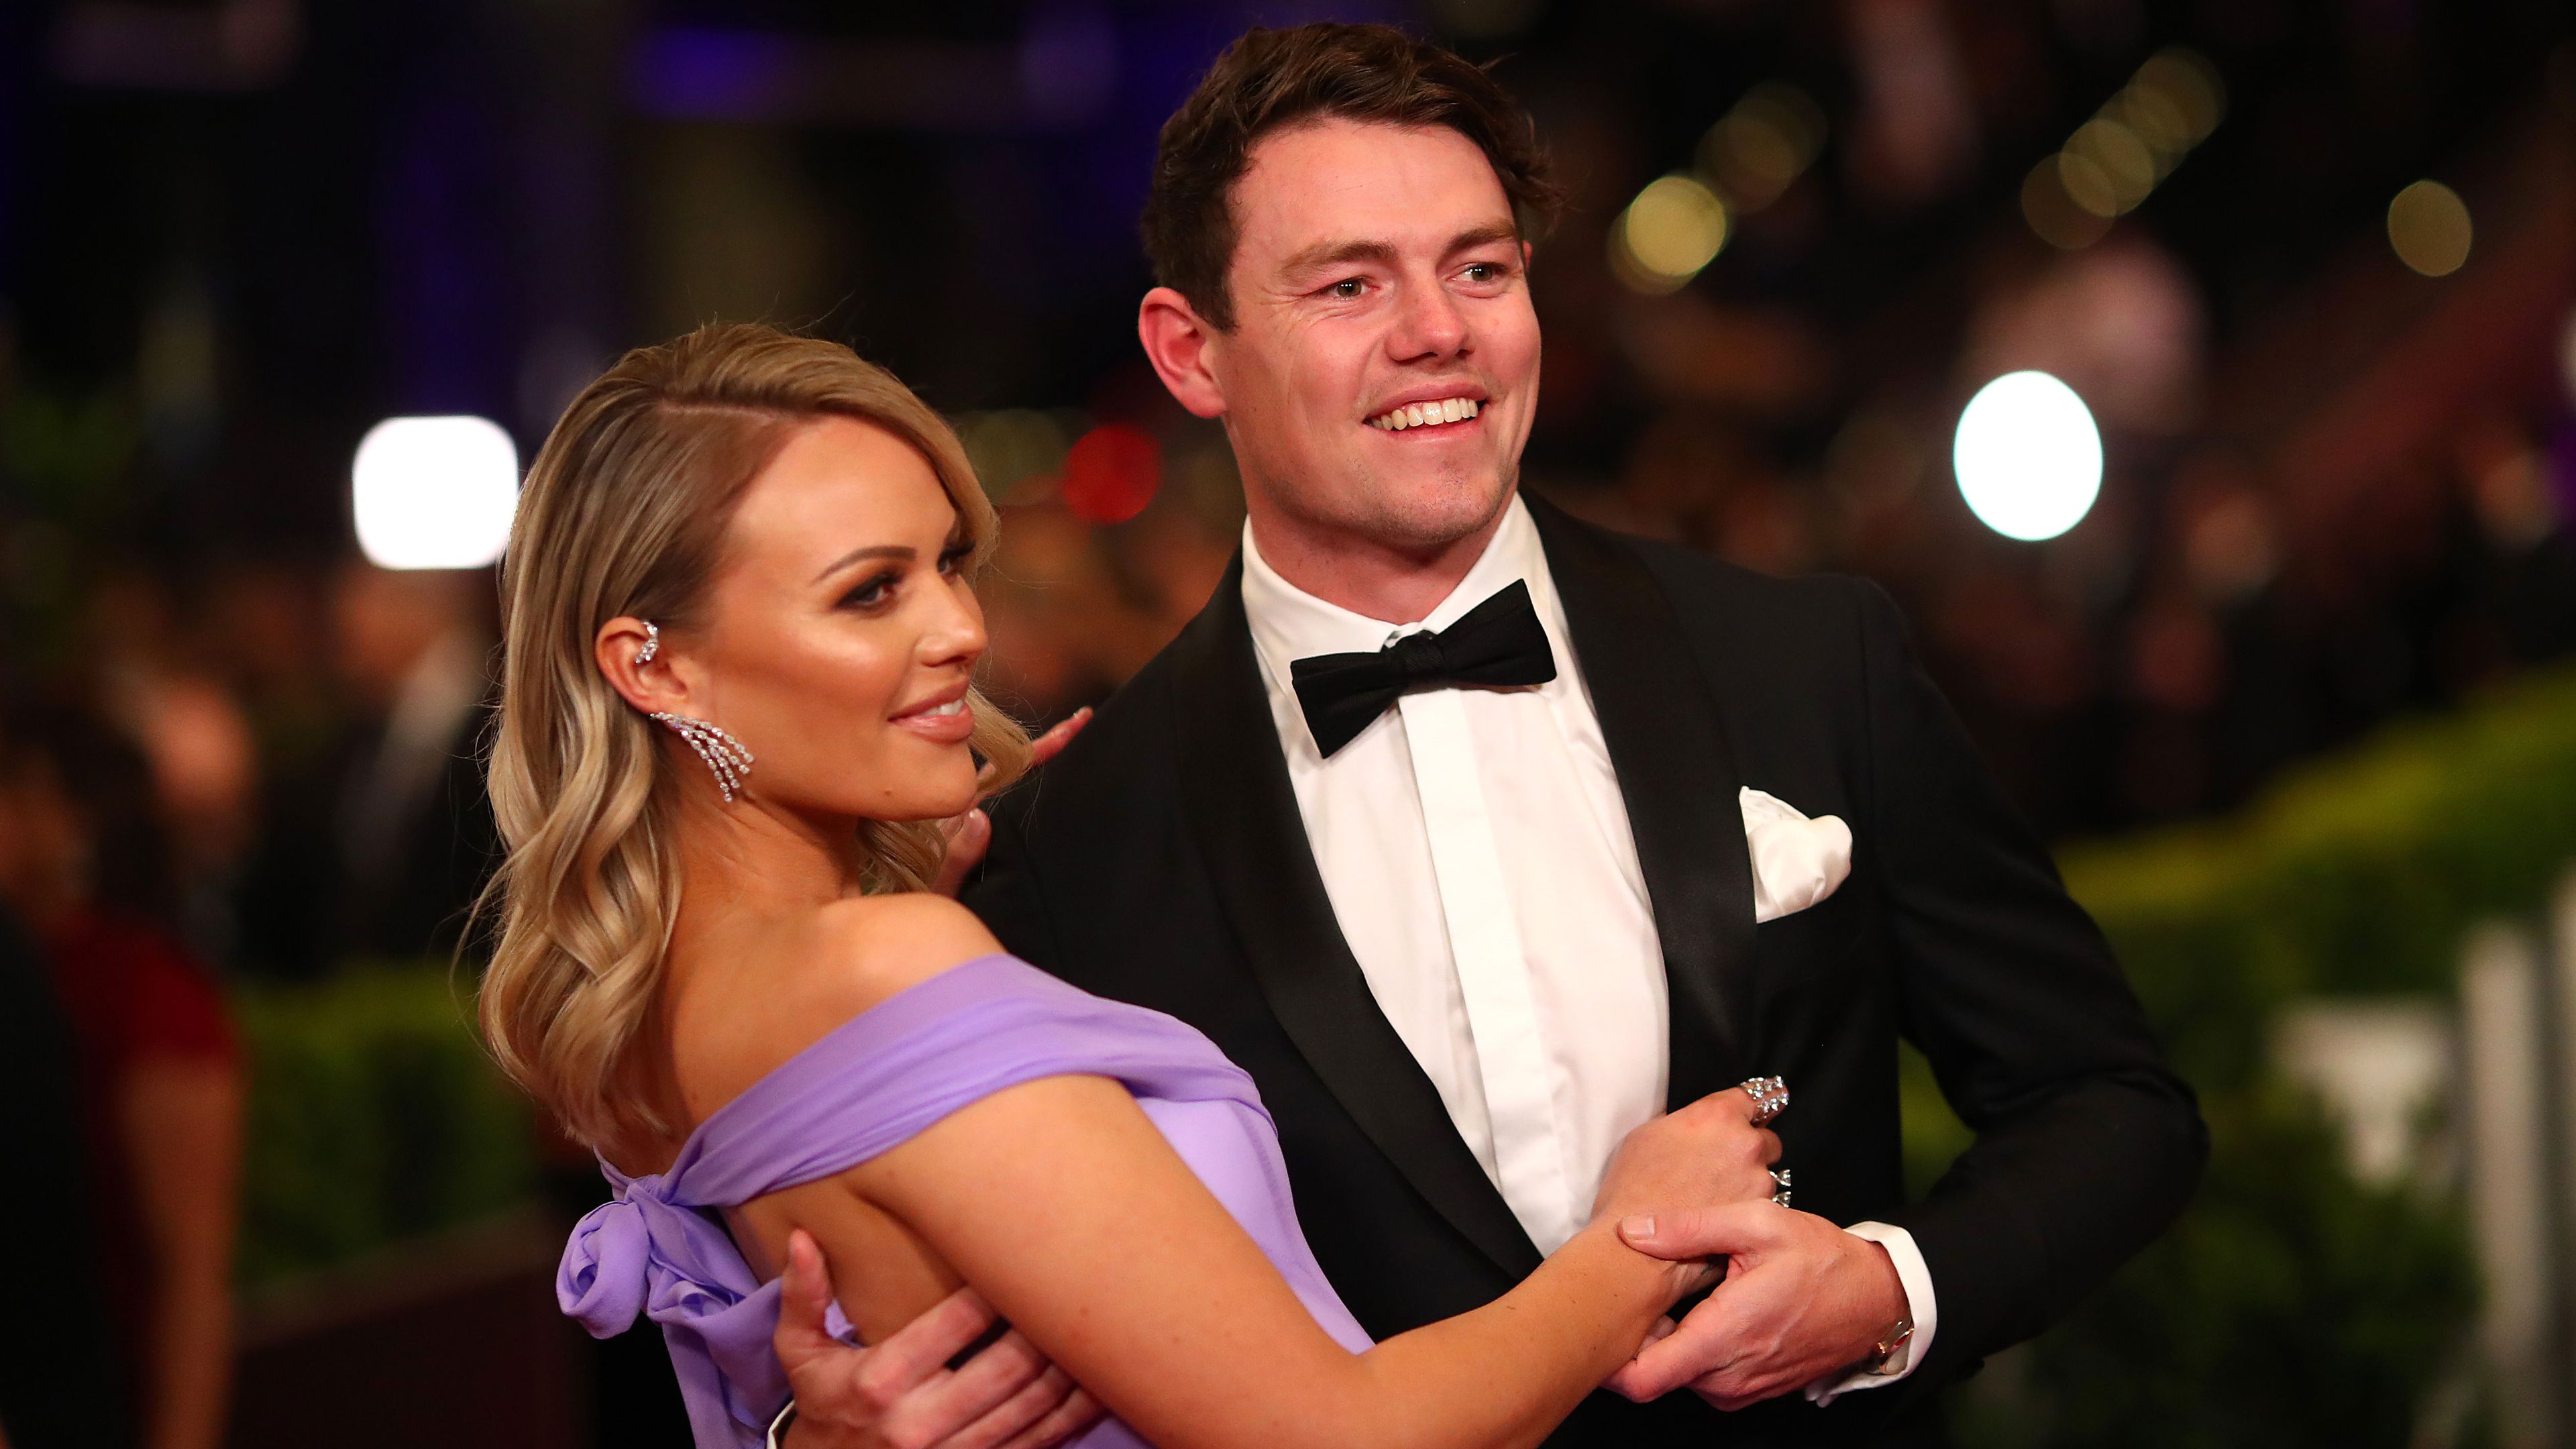 Brisbane Lions star Lachie Neale opens up about 'vile' attacks on his wife as contract saga played out